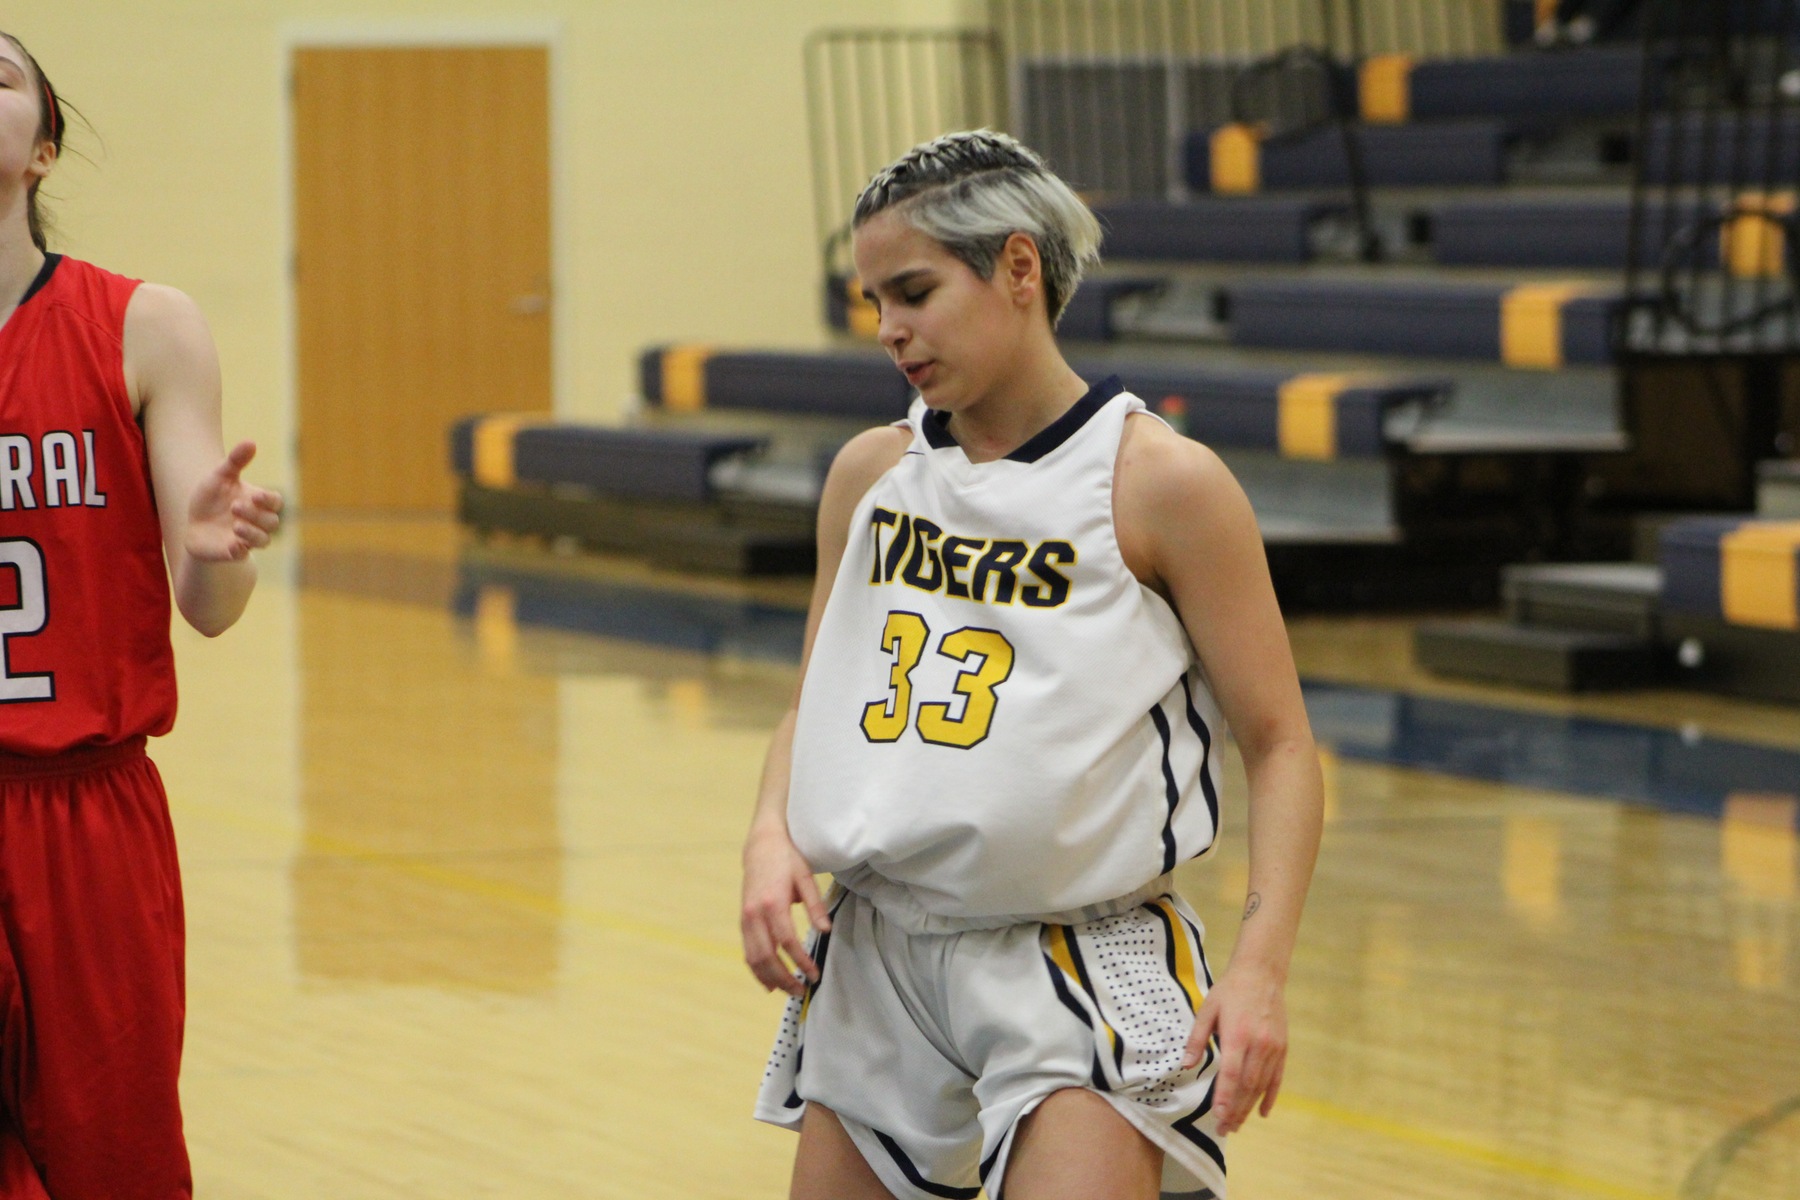 Tigers' season comes to an end in Region XI Tournament